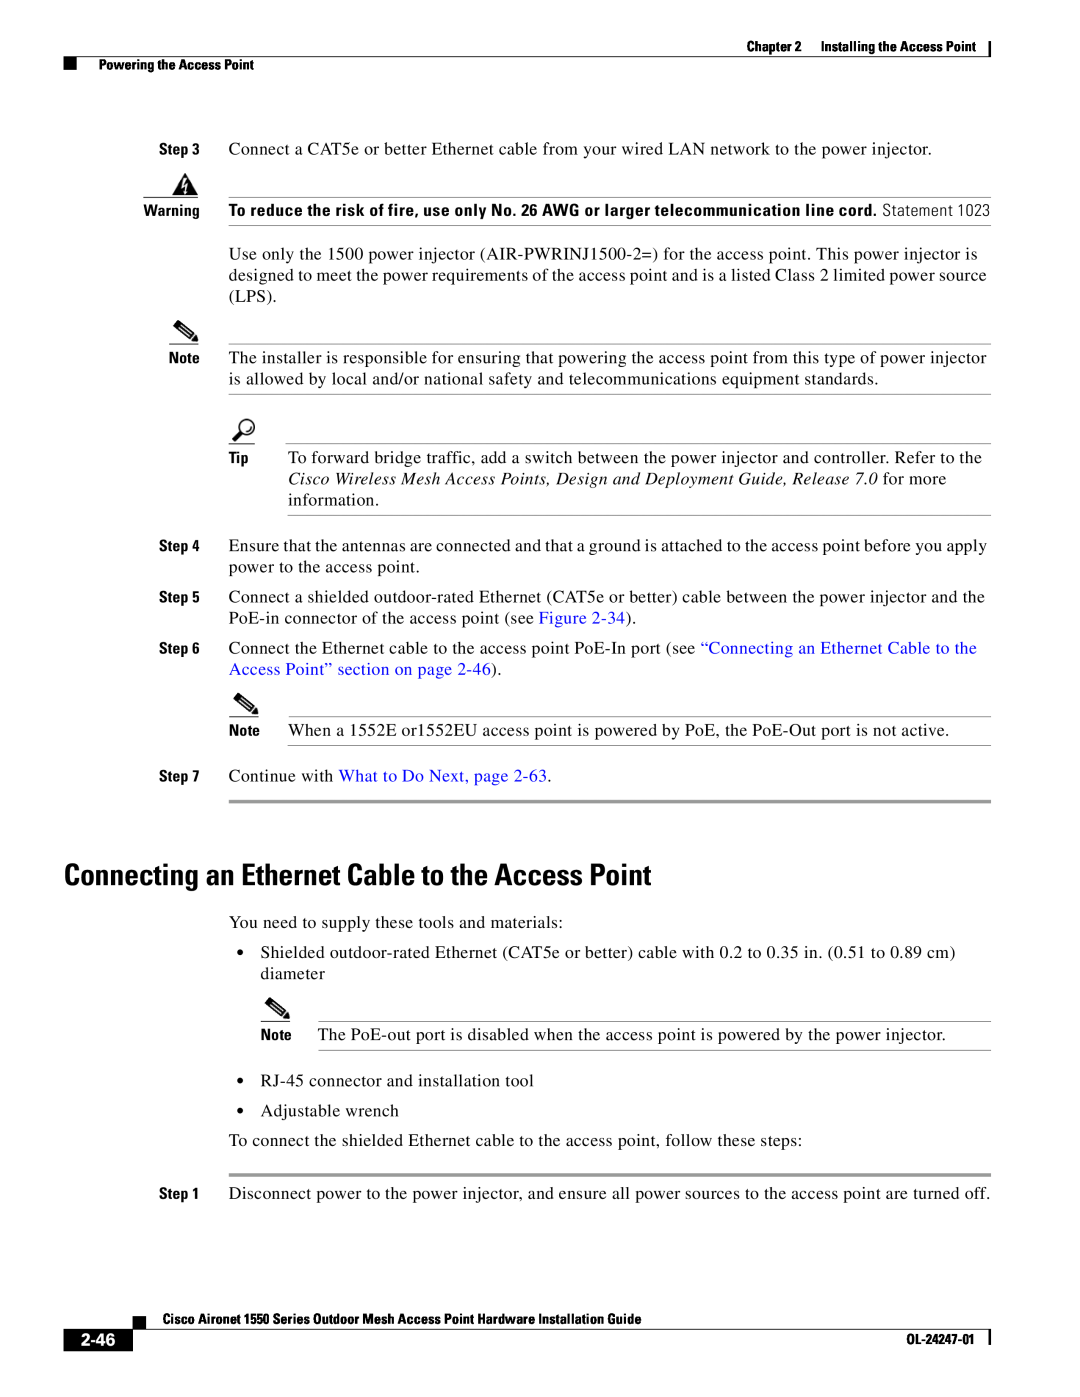 Cisco Systems AIRPWRINJ15002 Connecting an Ethernet Cable to the Access Point, Continue with What to Do Next, page, 2-46 